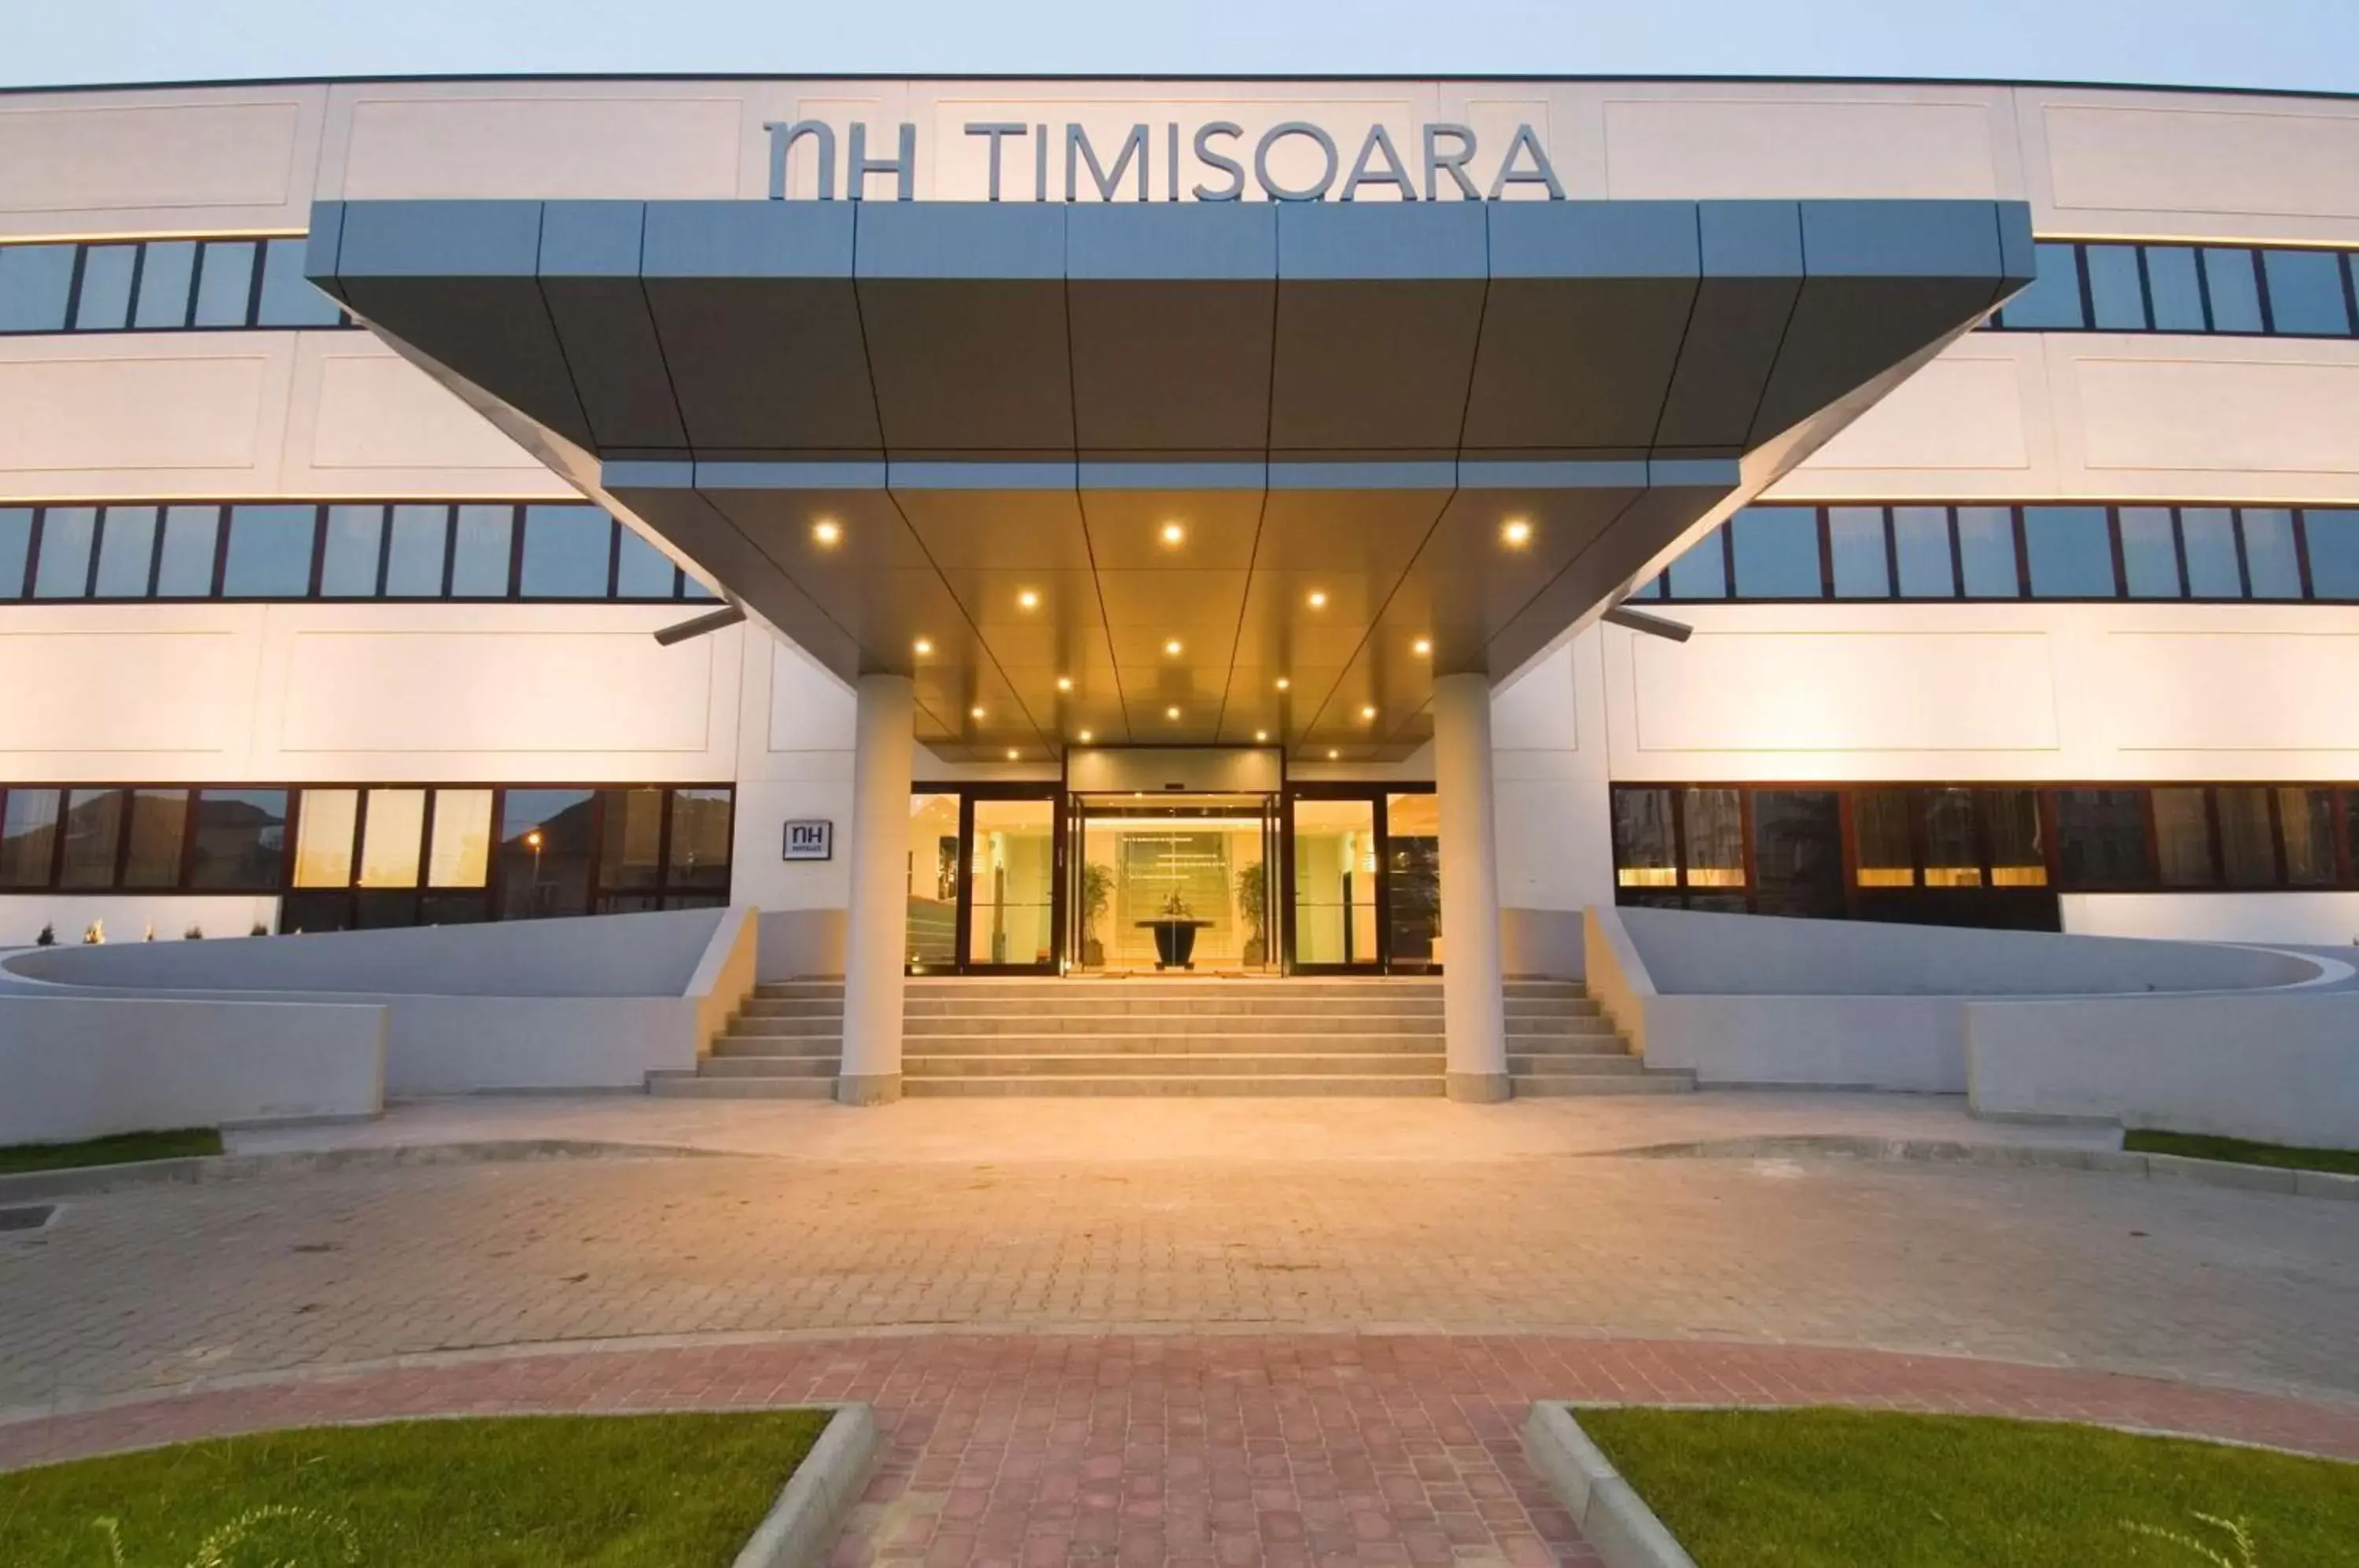 Property building in NH Timisoara